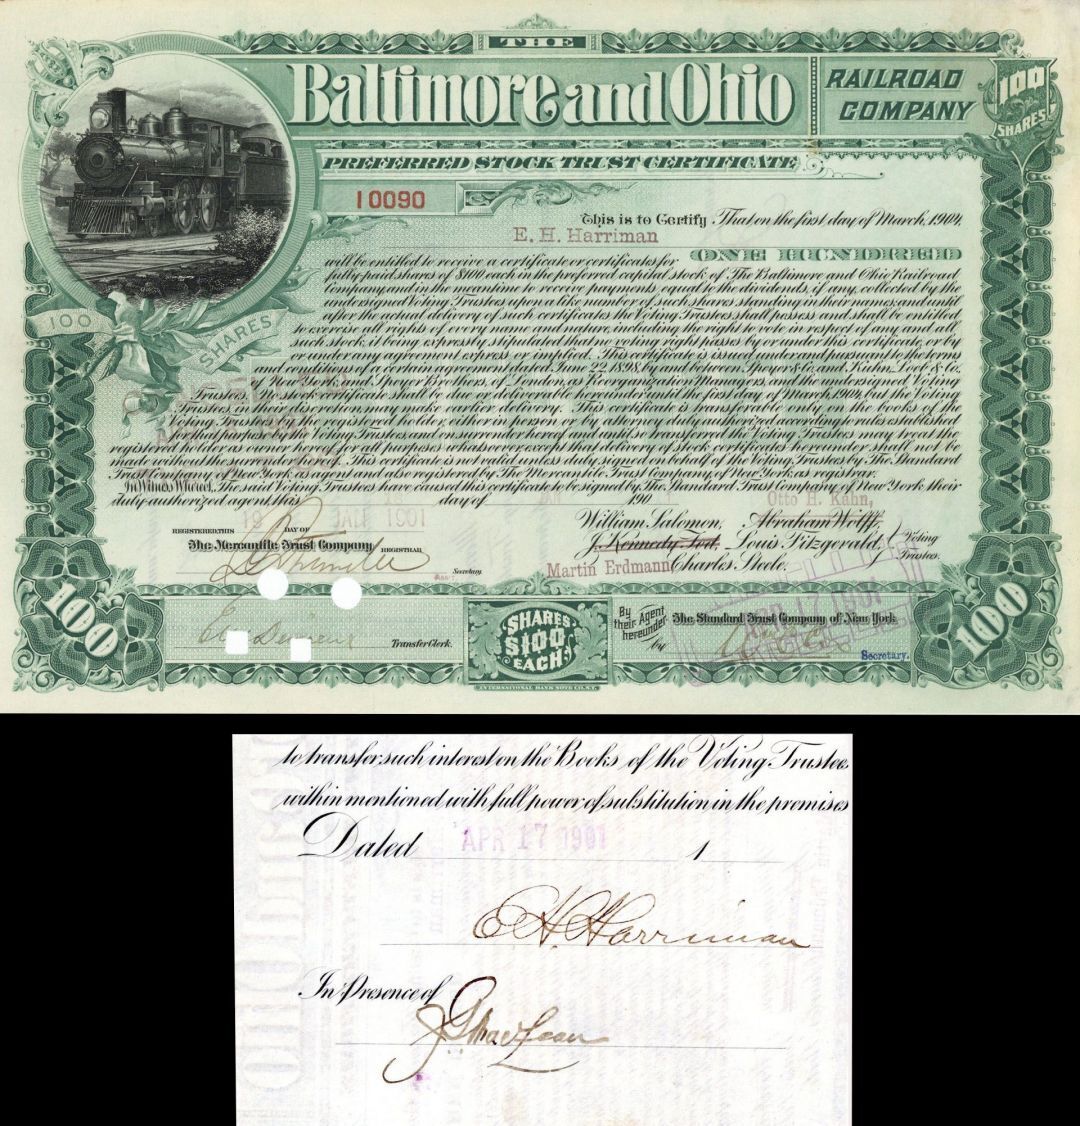 Baltimore and Ohio Railroad Co. signed by E H Harriman - Stock Certificate - Aut